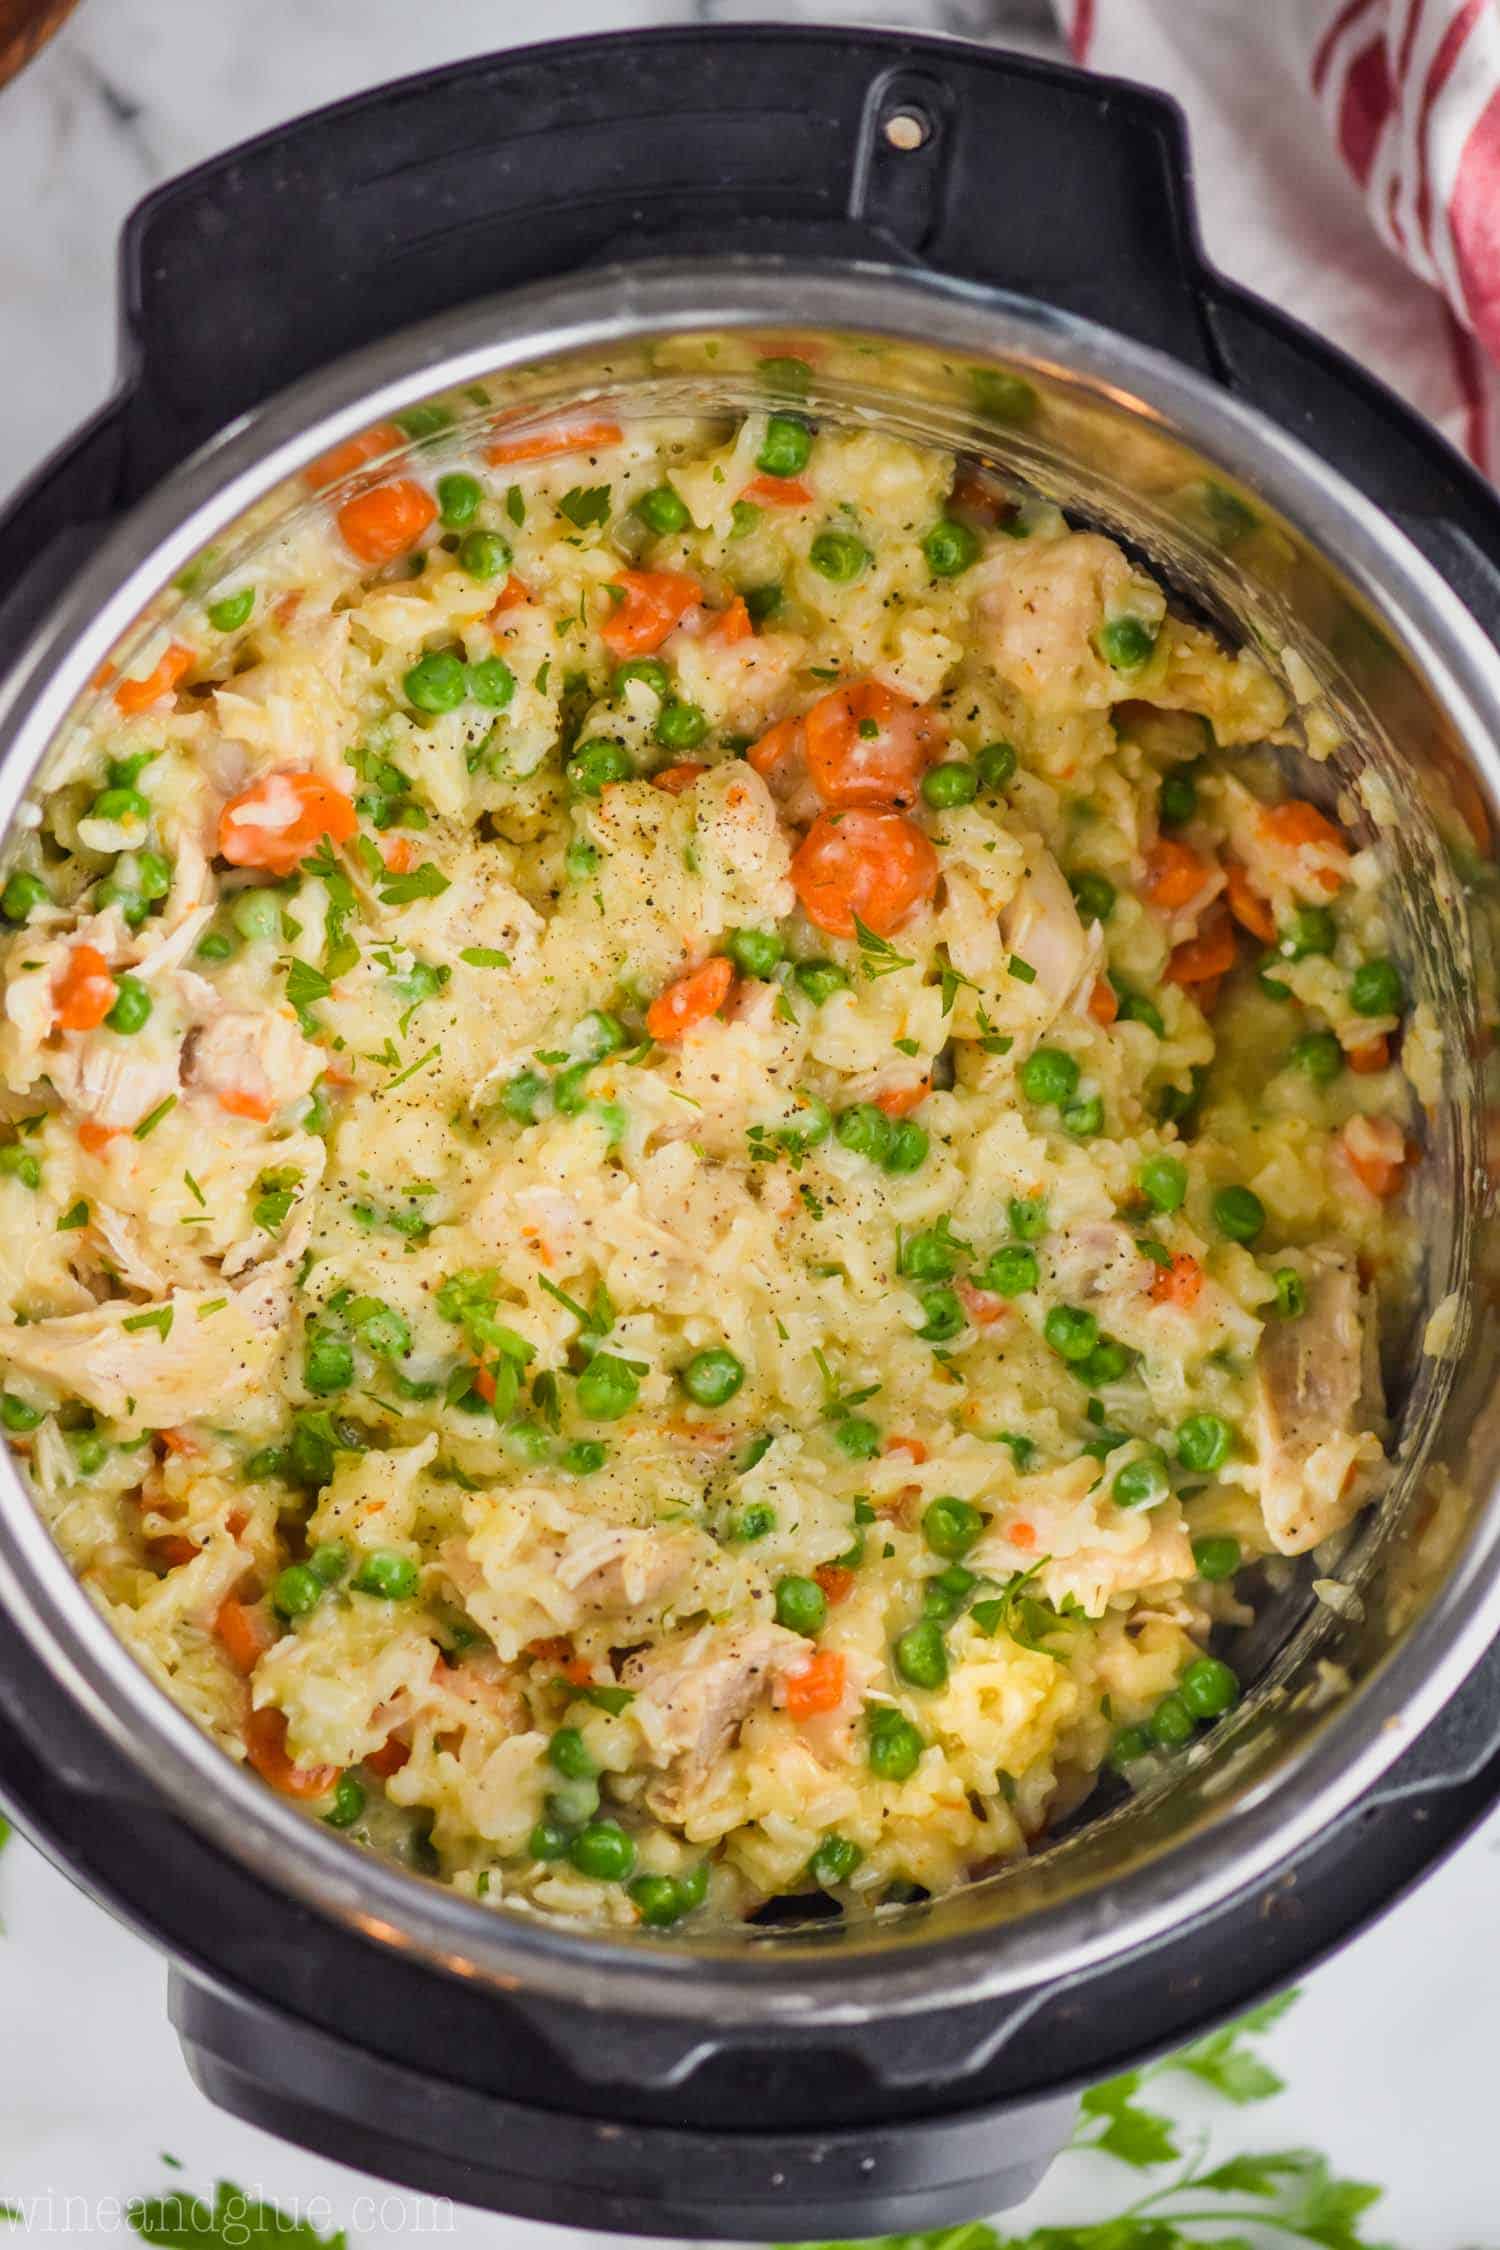 How To Make Instant Pot Chicken and Rice